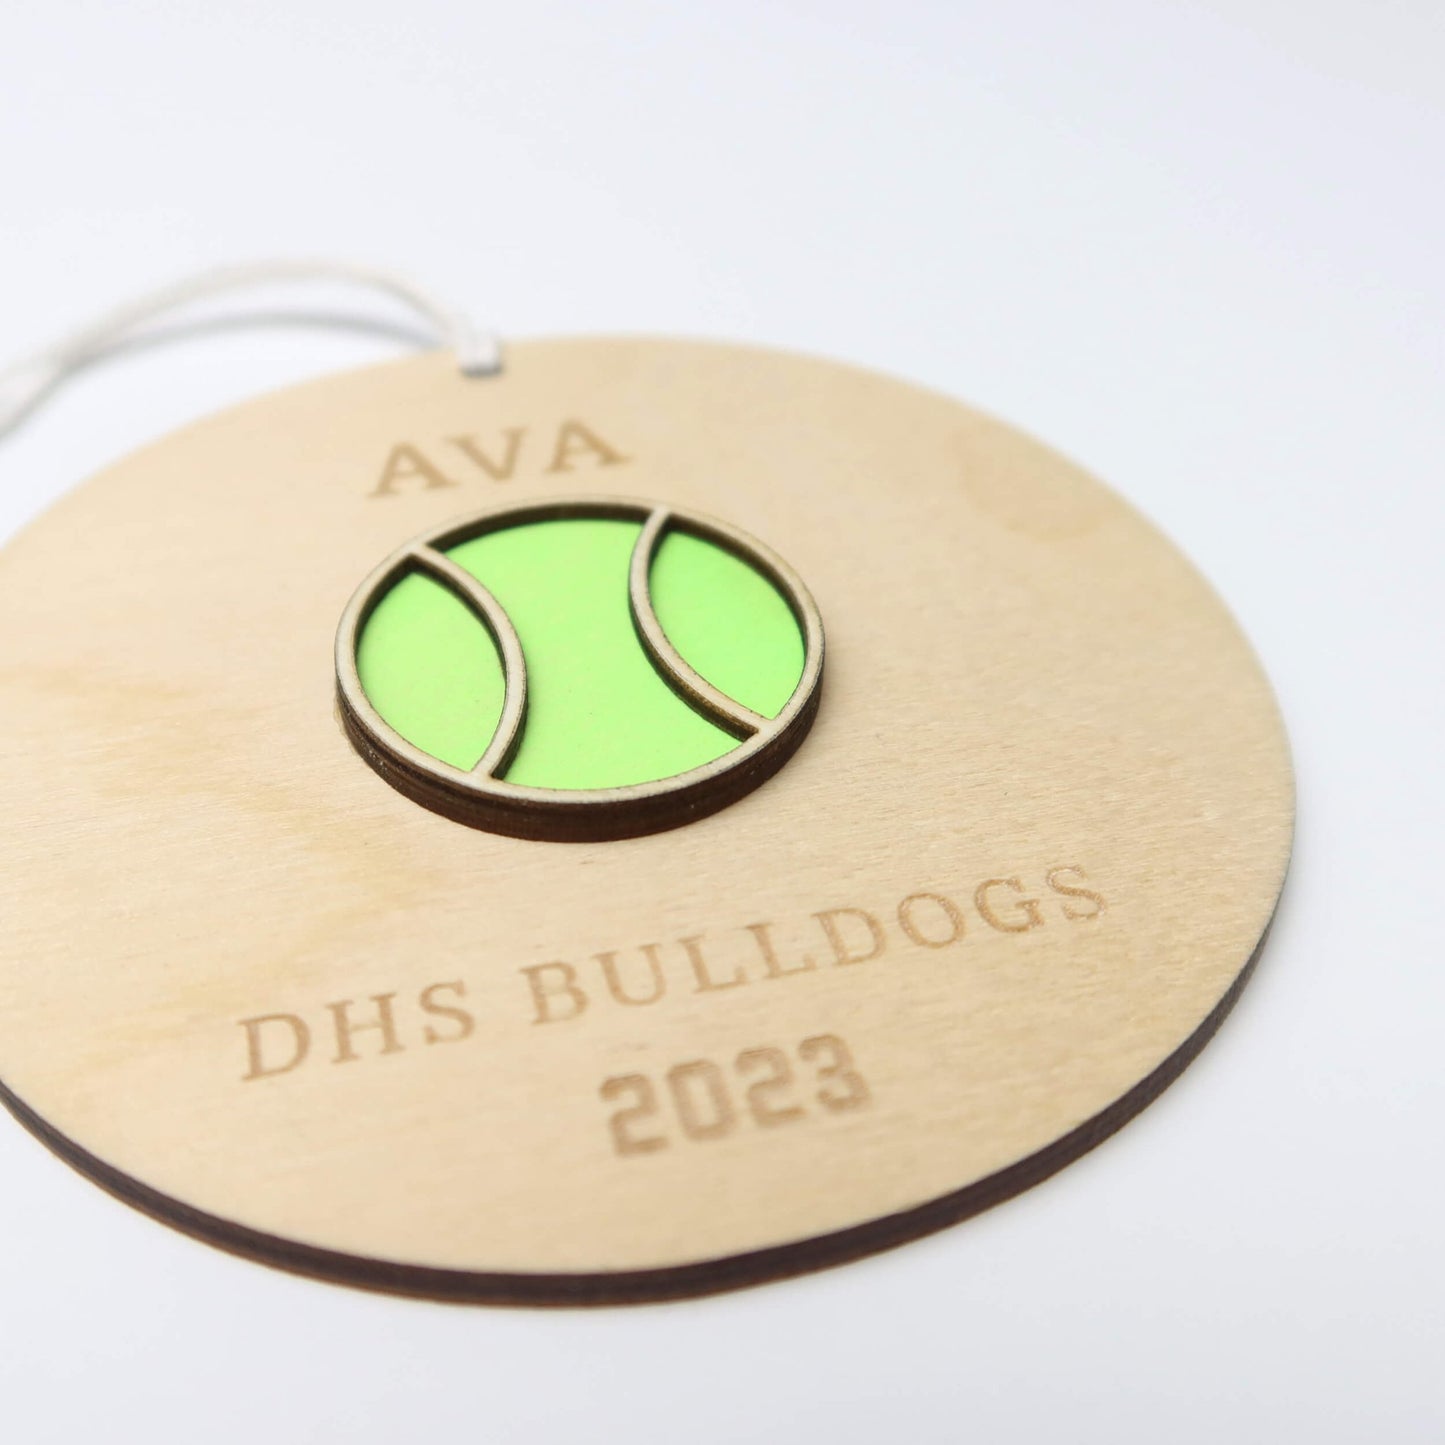 Personalized Tennis Ornament - Holiday Ornaments - Moon Rock Prints